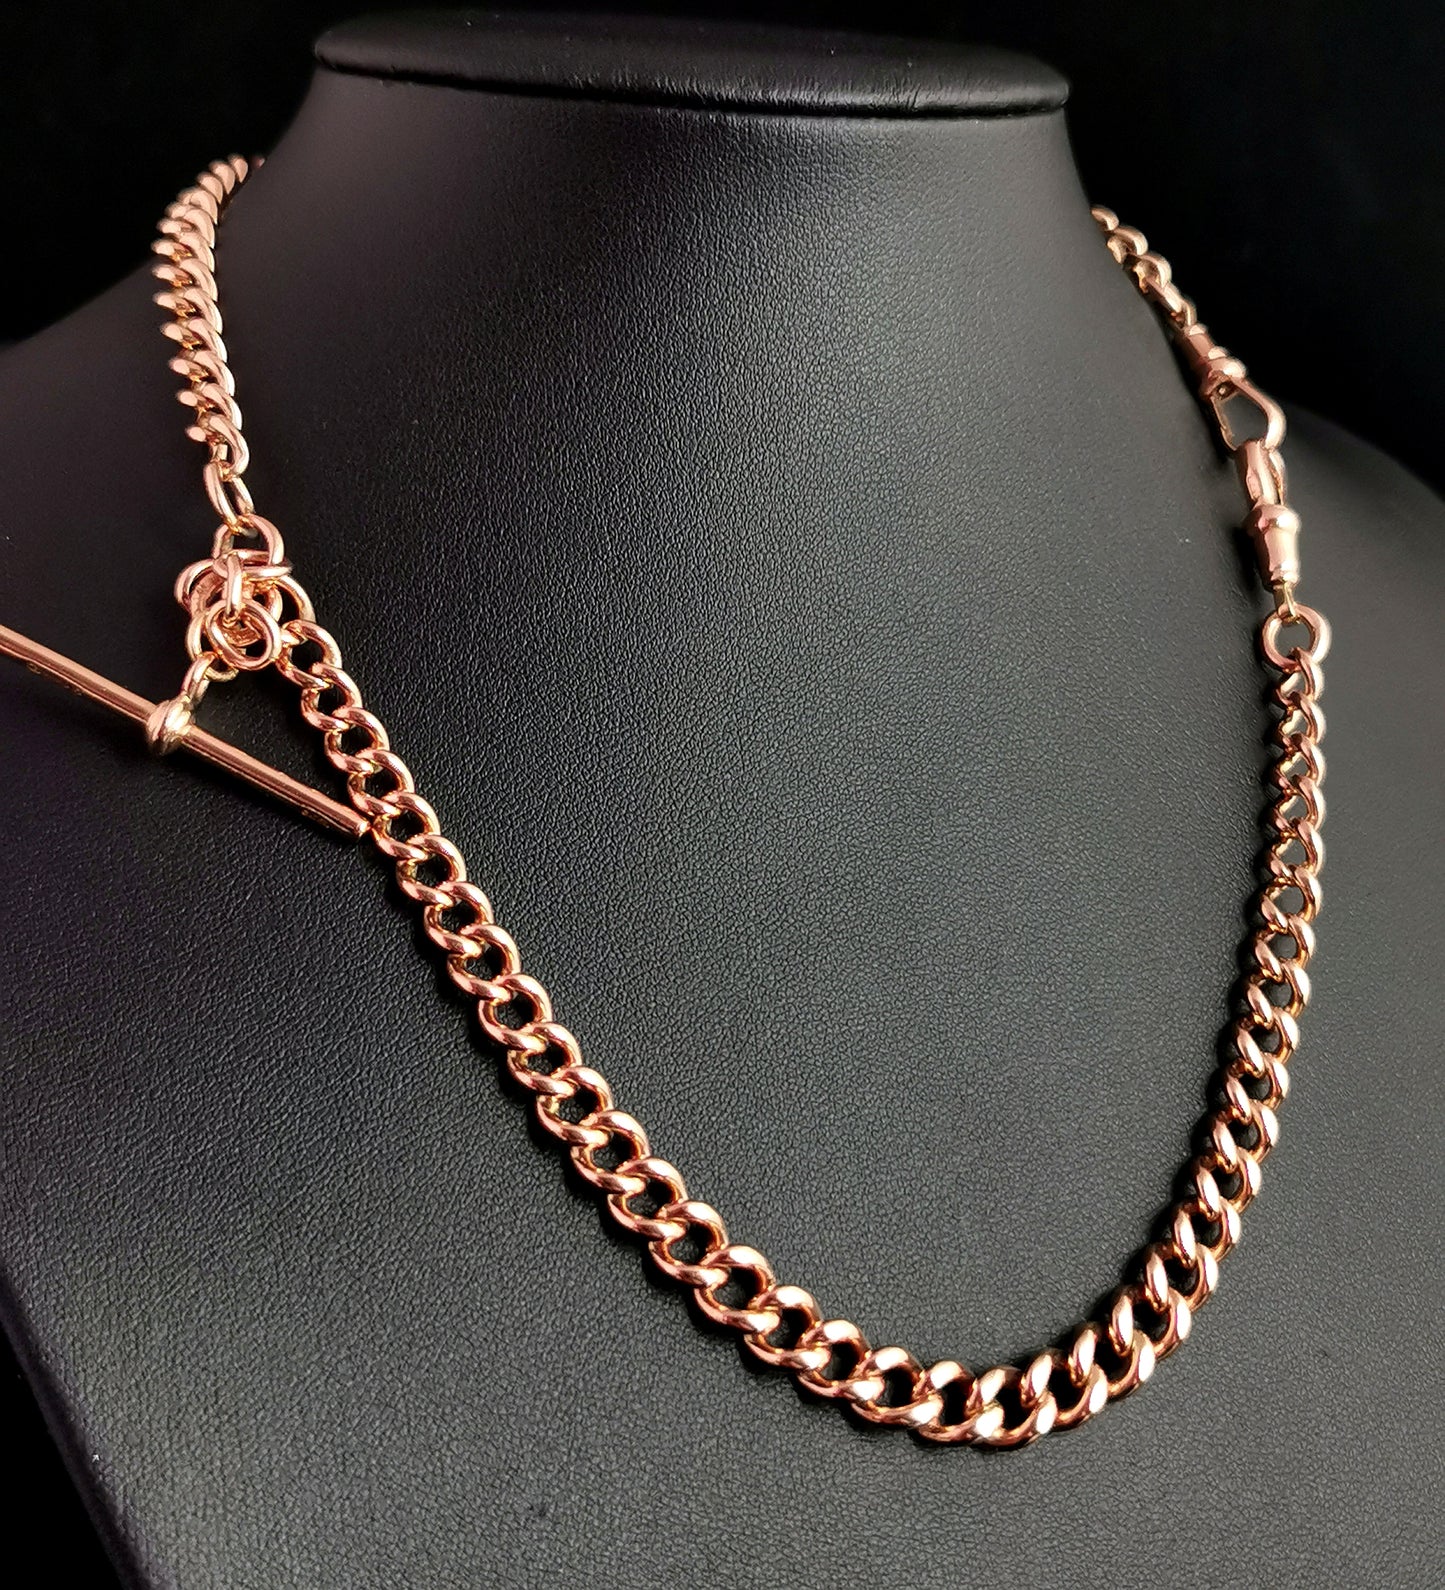 Antique 9ct Rose gold Albert chain, watch chain necklace, Edwardian, heavy